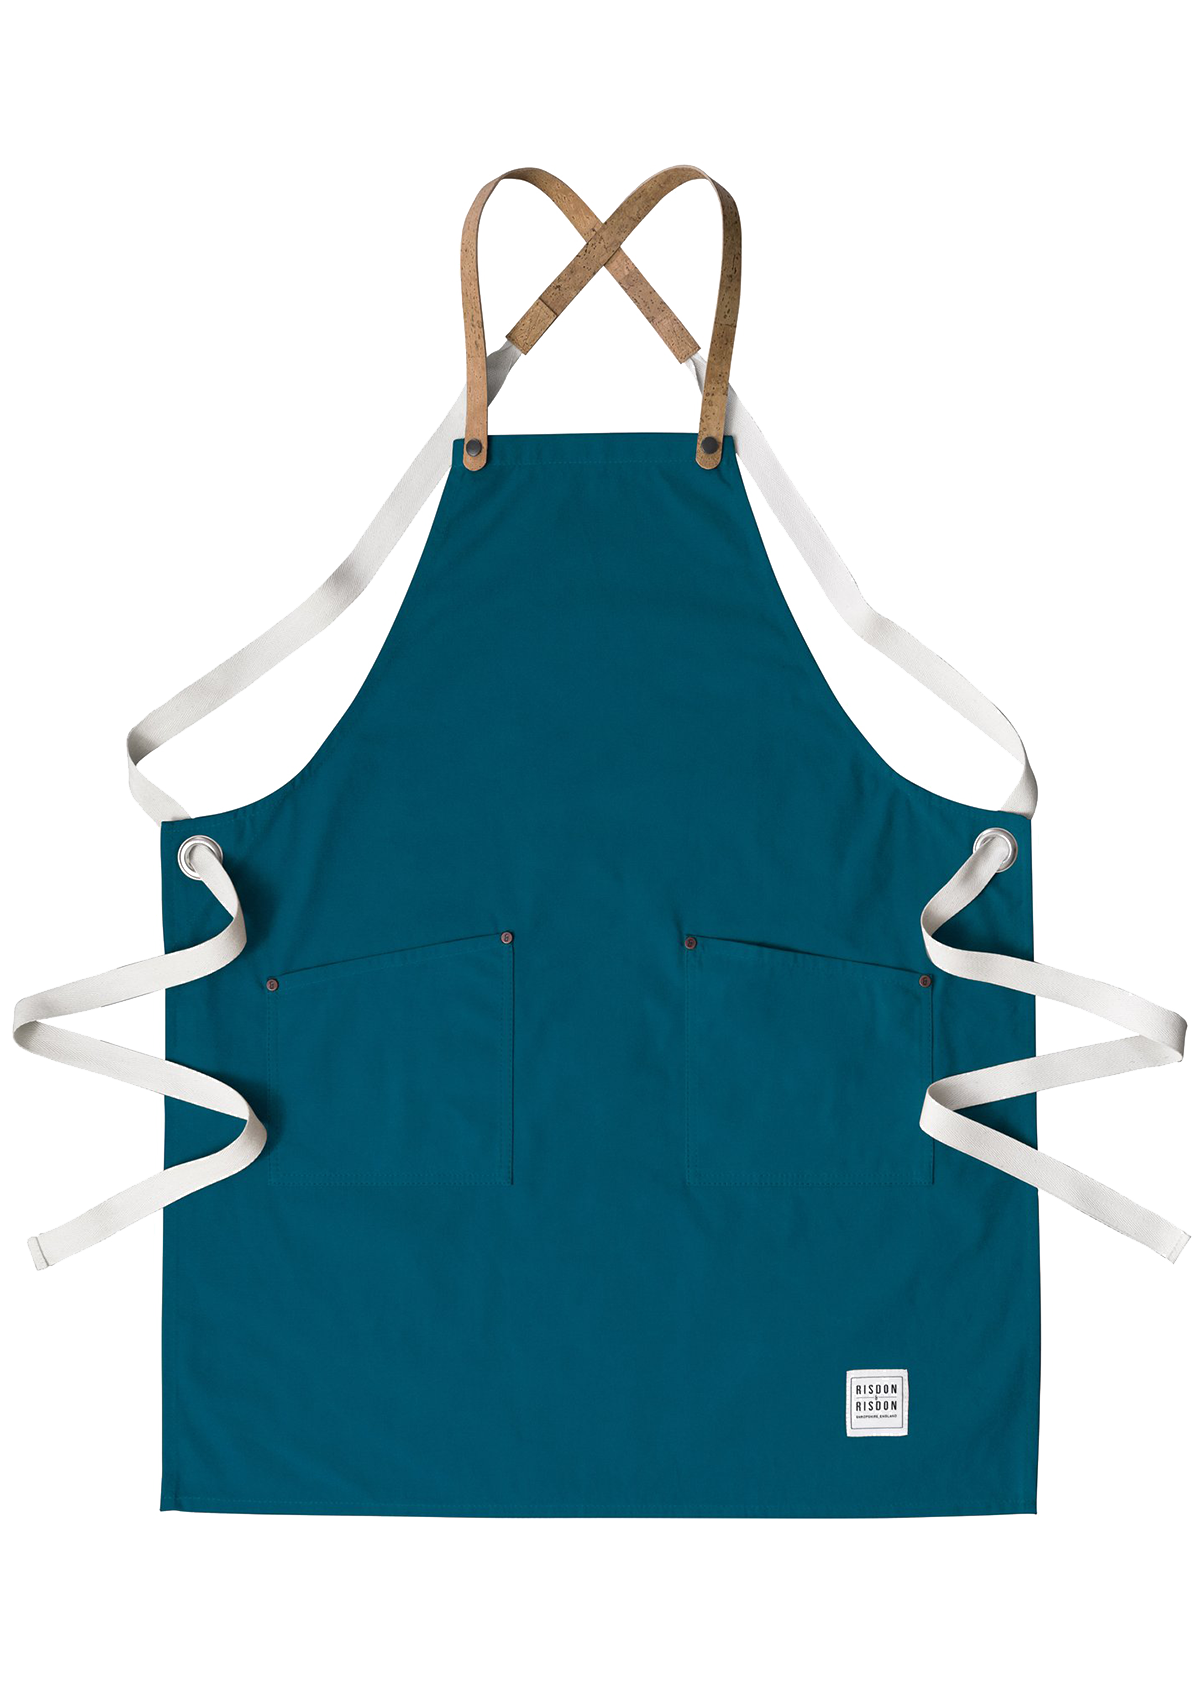 Handcrafted Apron Studio with Cork Straps